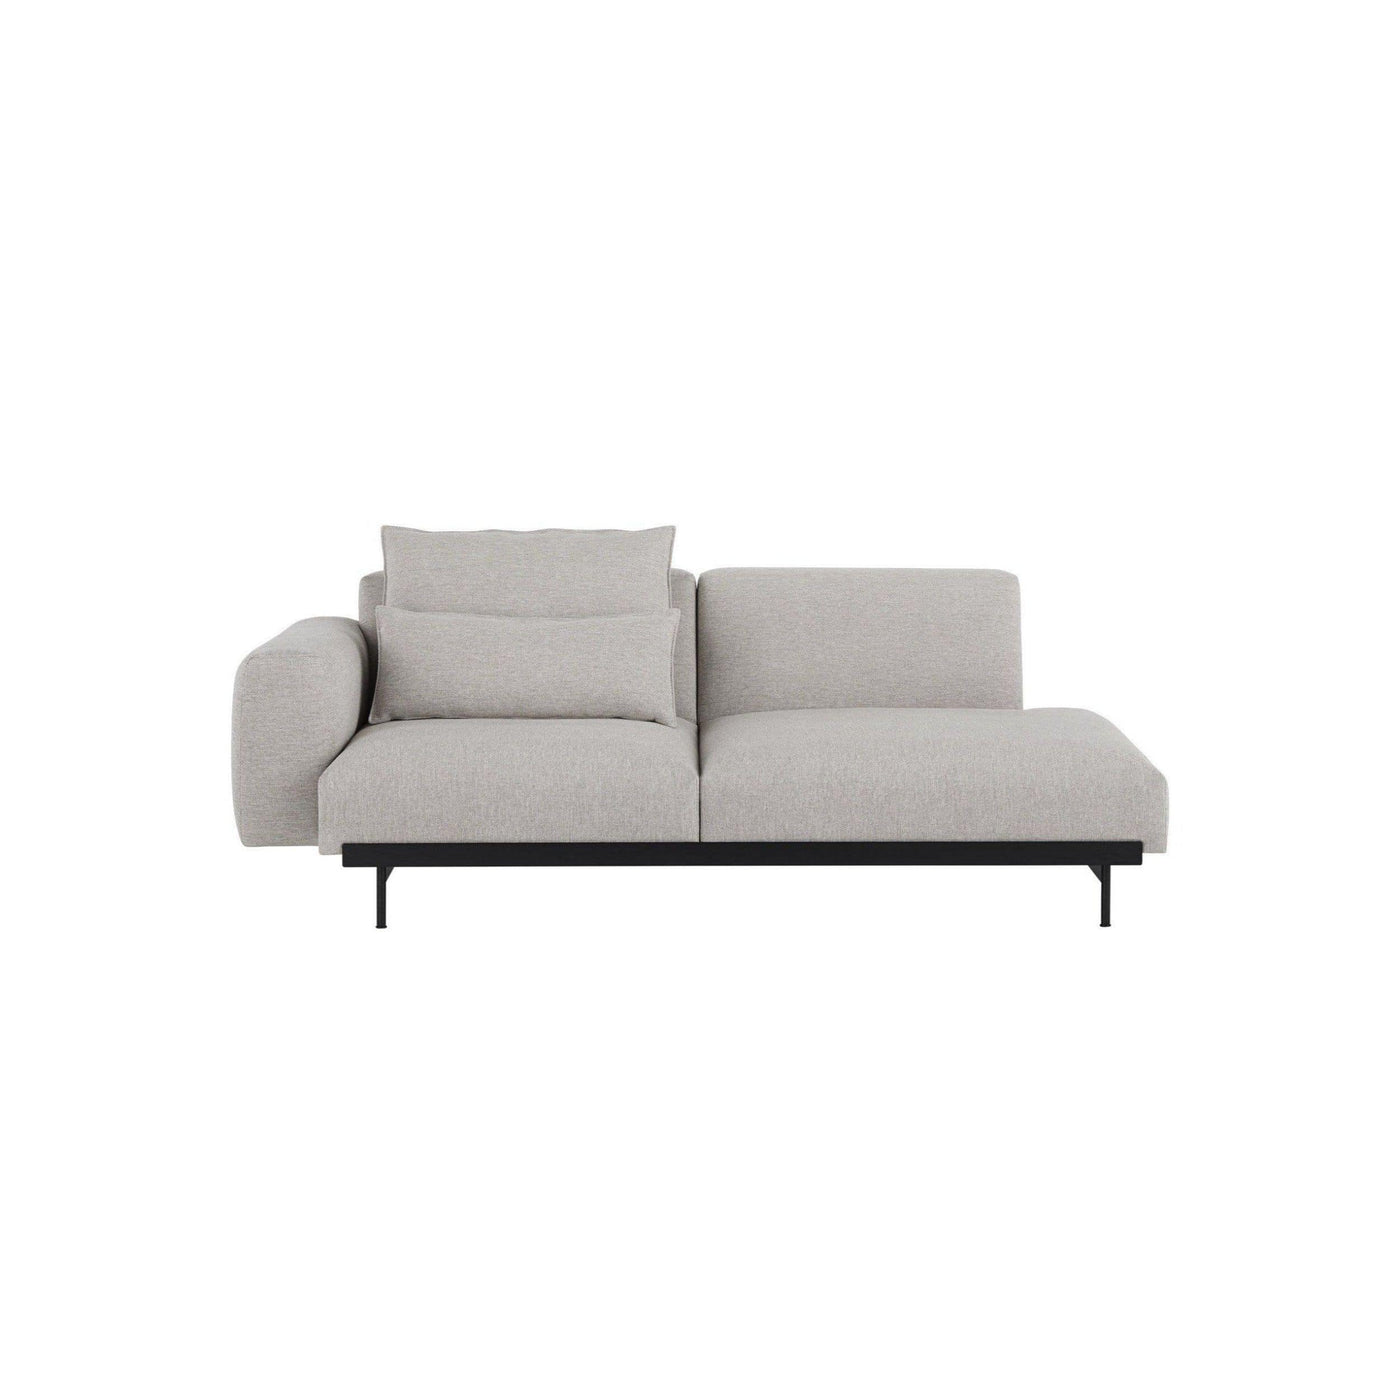 Muuto In Situ Modular 2 Seater Sofa, configuration 3 in clay 12 fabric. Made to order from someday designs #colour_clay-12